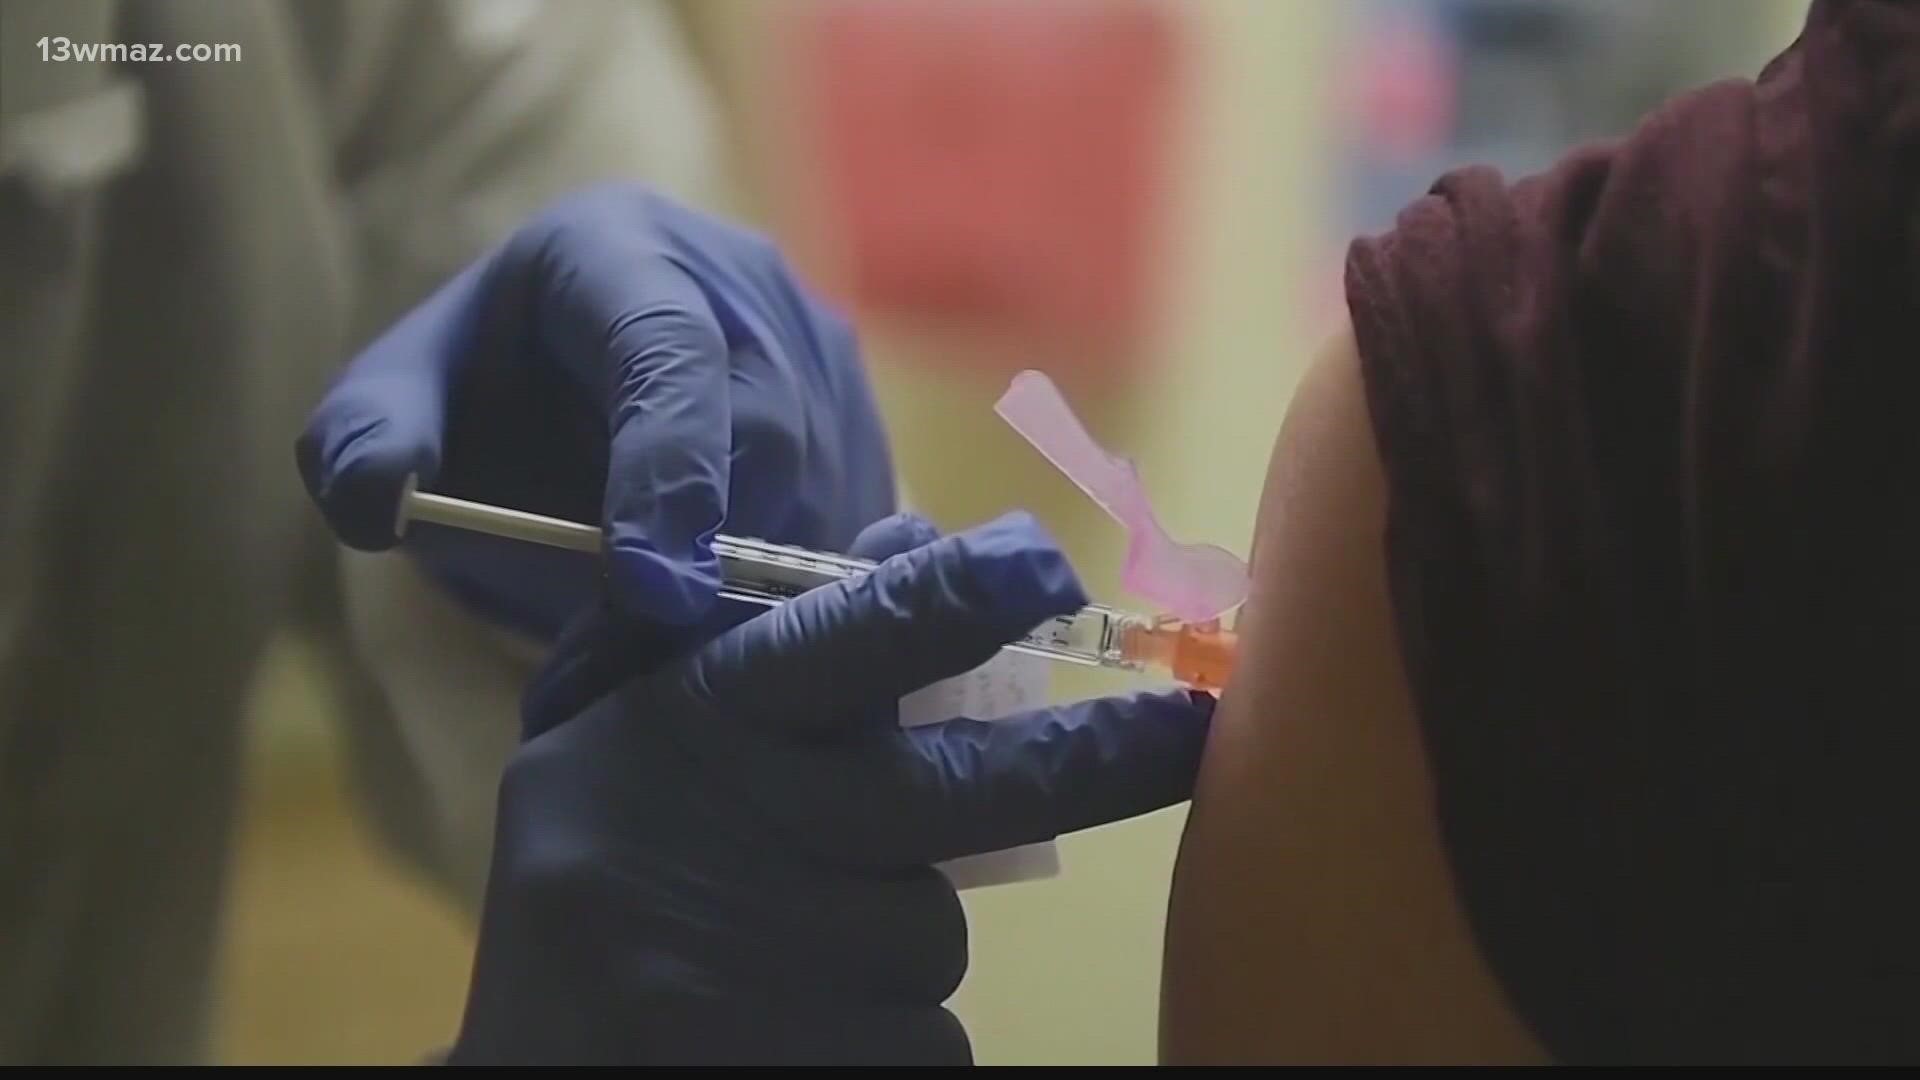 According to the state health department, Georgia is reporting an average of 3,000 COVID cases weekly. This new vaccine has an age restriction.